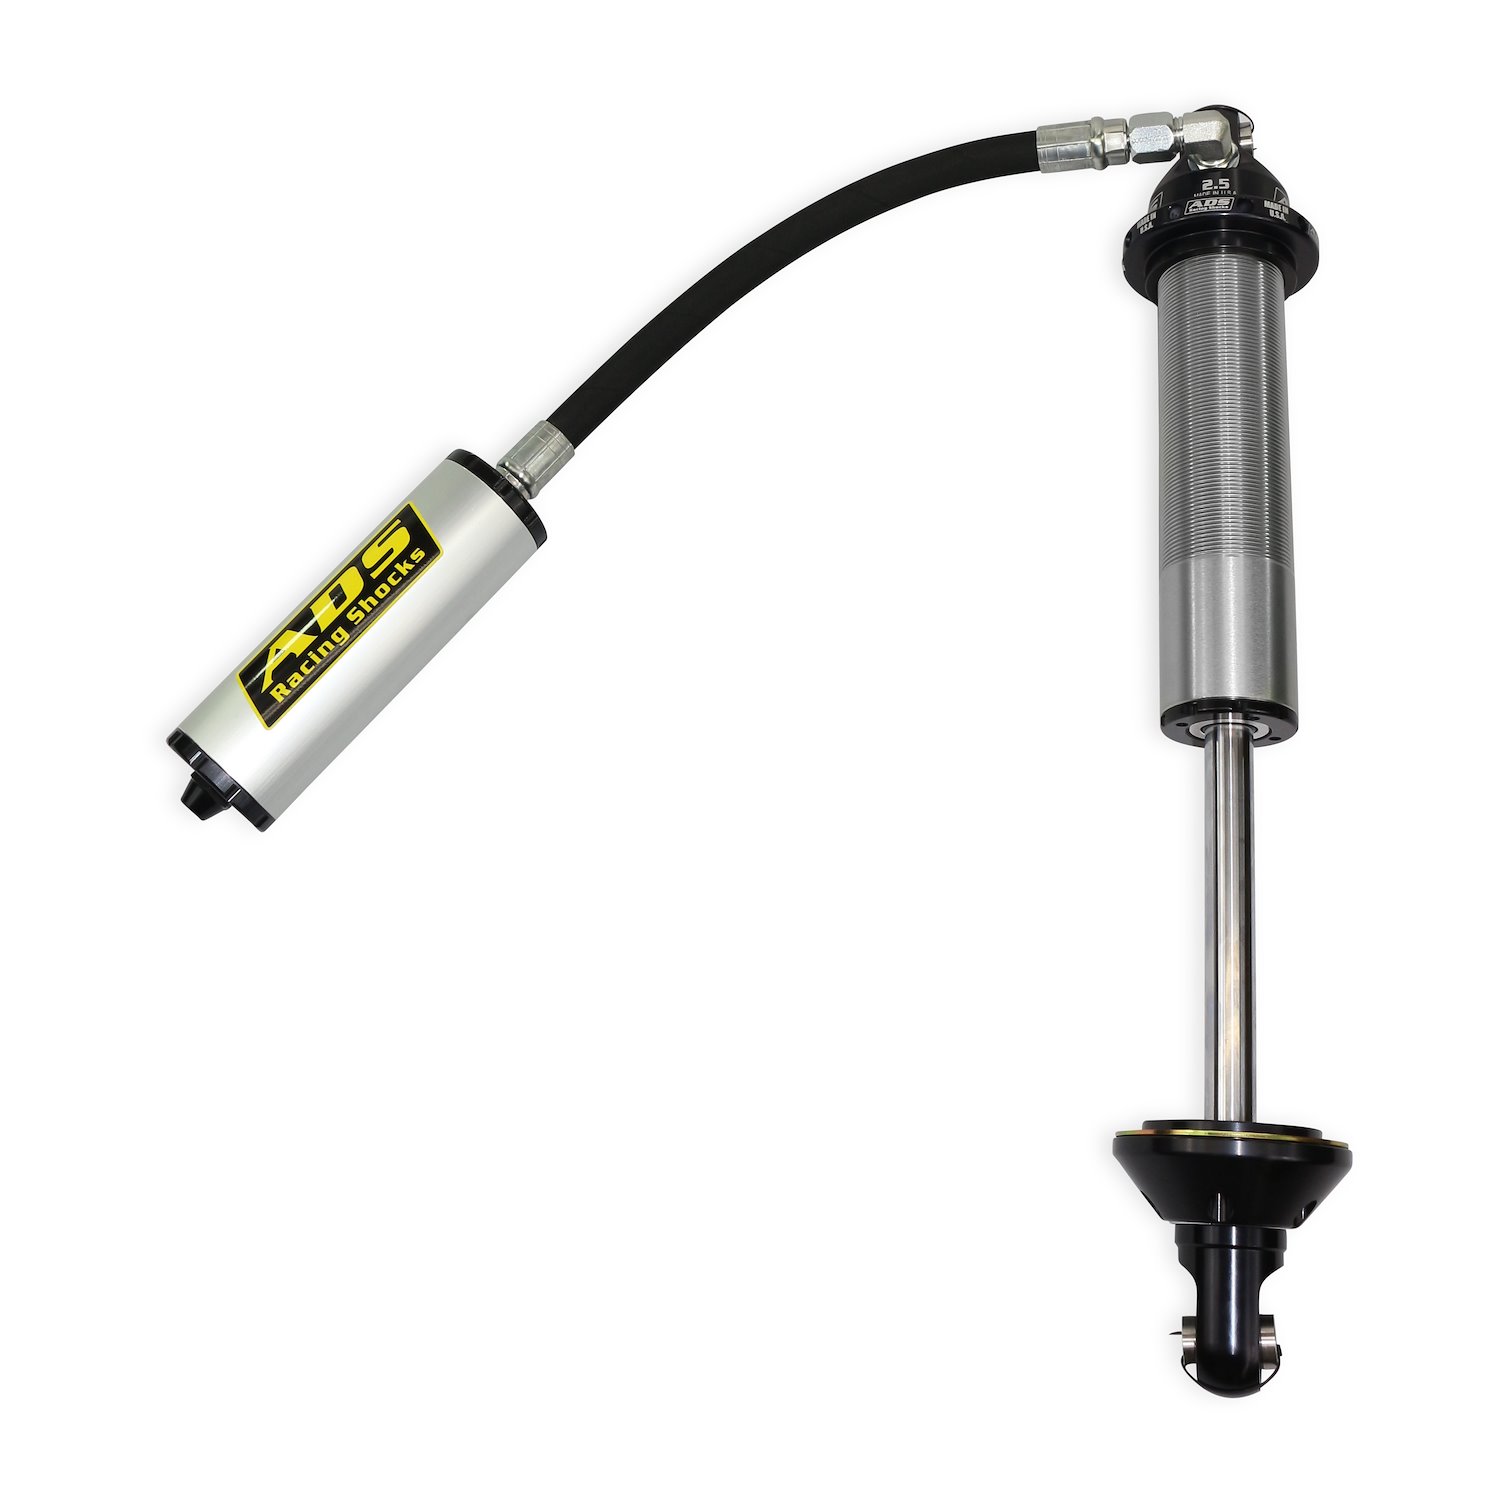 250-COS08-0R9 Coil-Over Race Shock, 2.5 in. x 8 in. Stroke, w/ Remote Reservoir (90-Degree Hose)